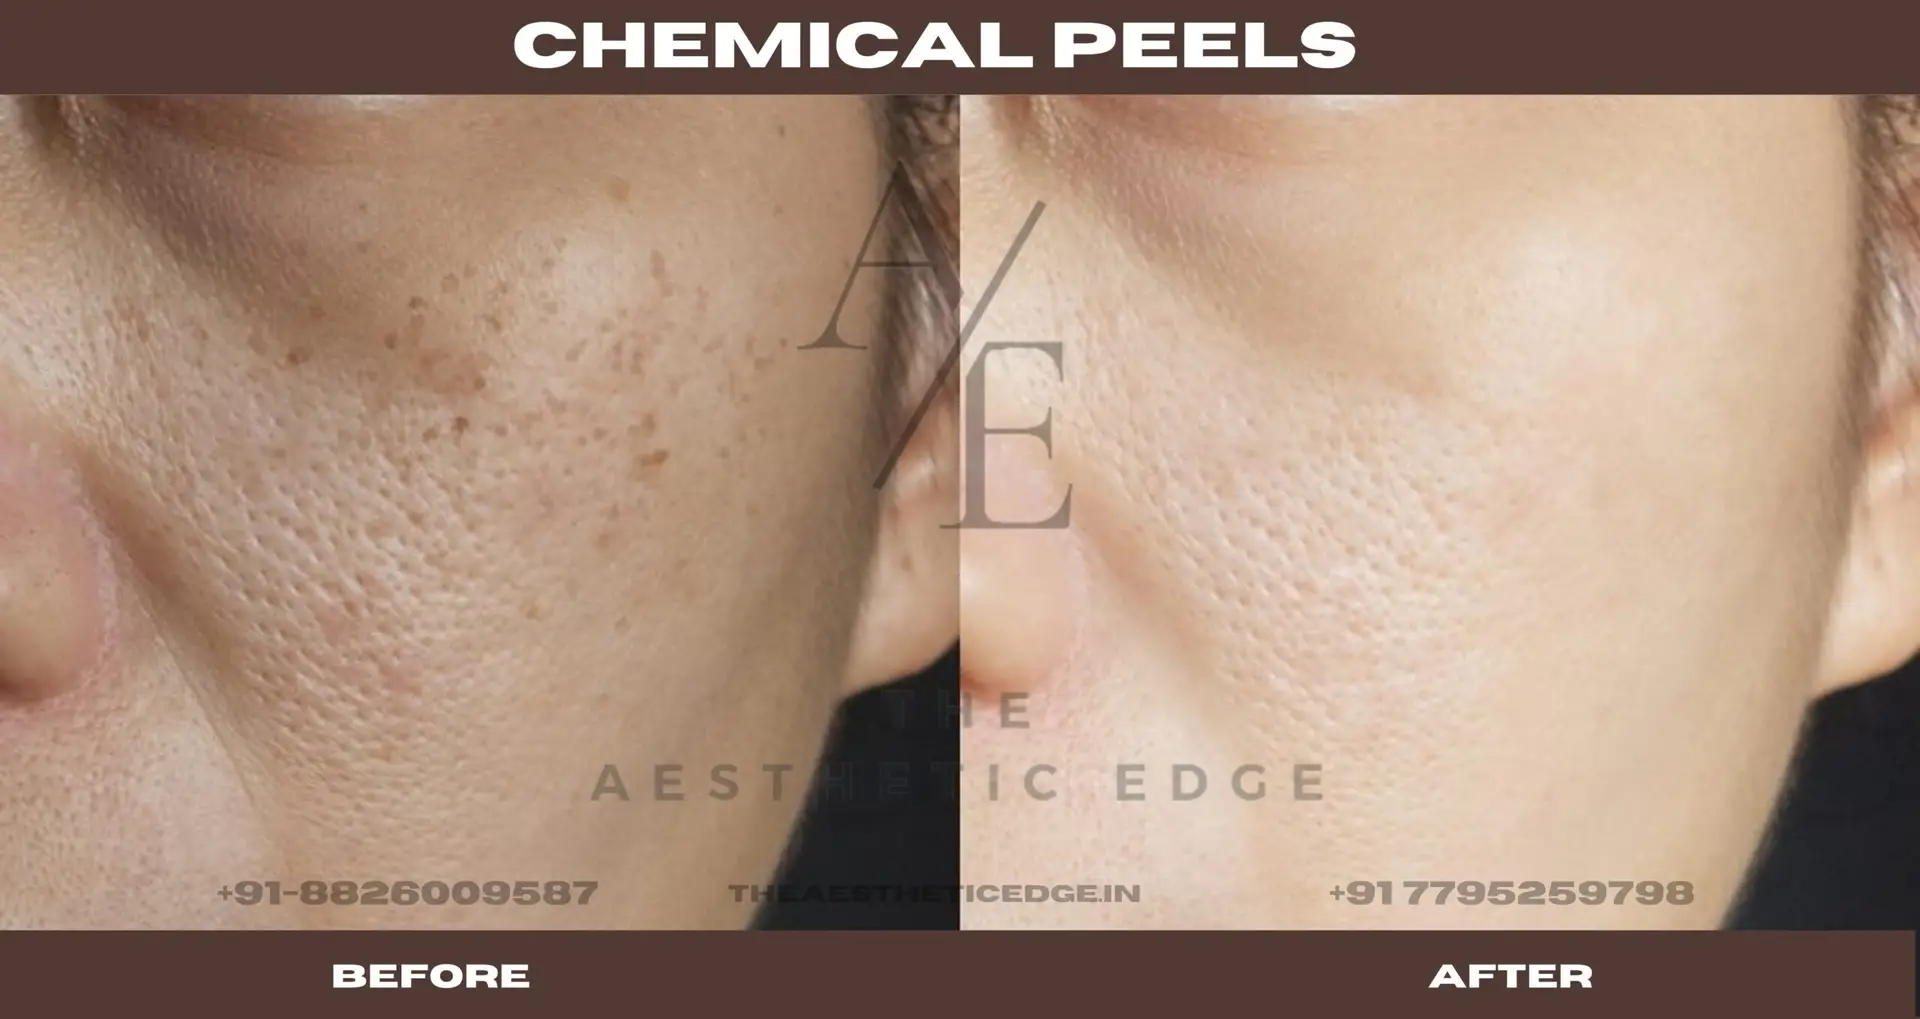 Chemical peel results